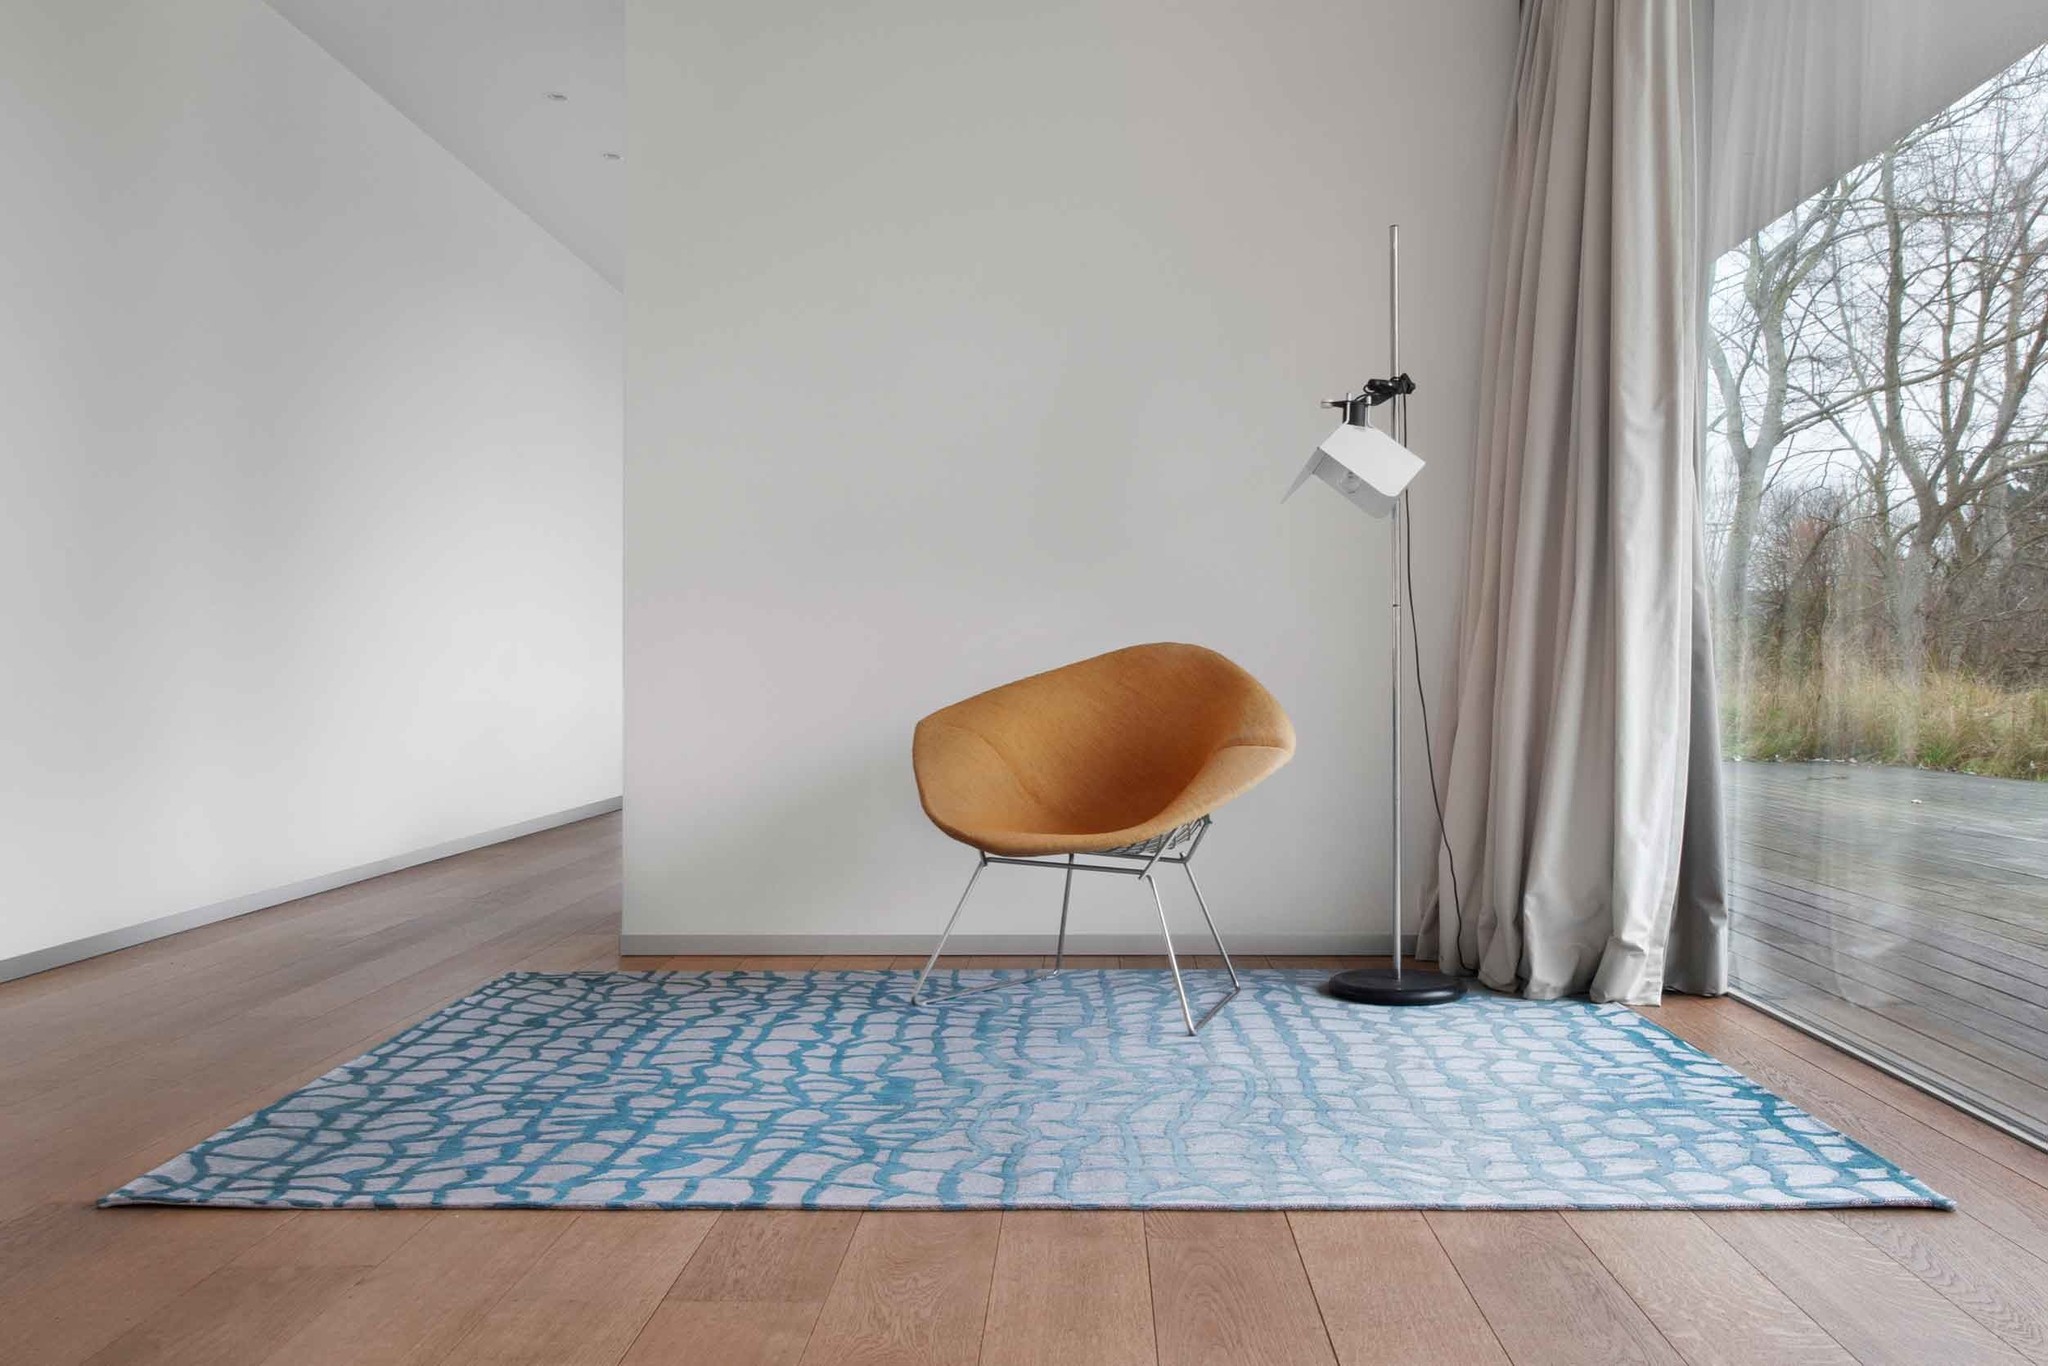 Abstract Blue Flatwoven Rug ☞ Size: 240 x 340 cm